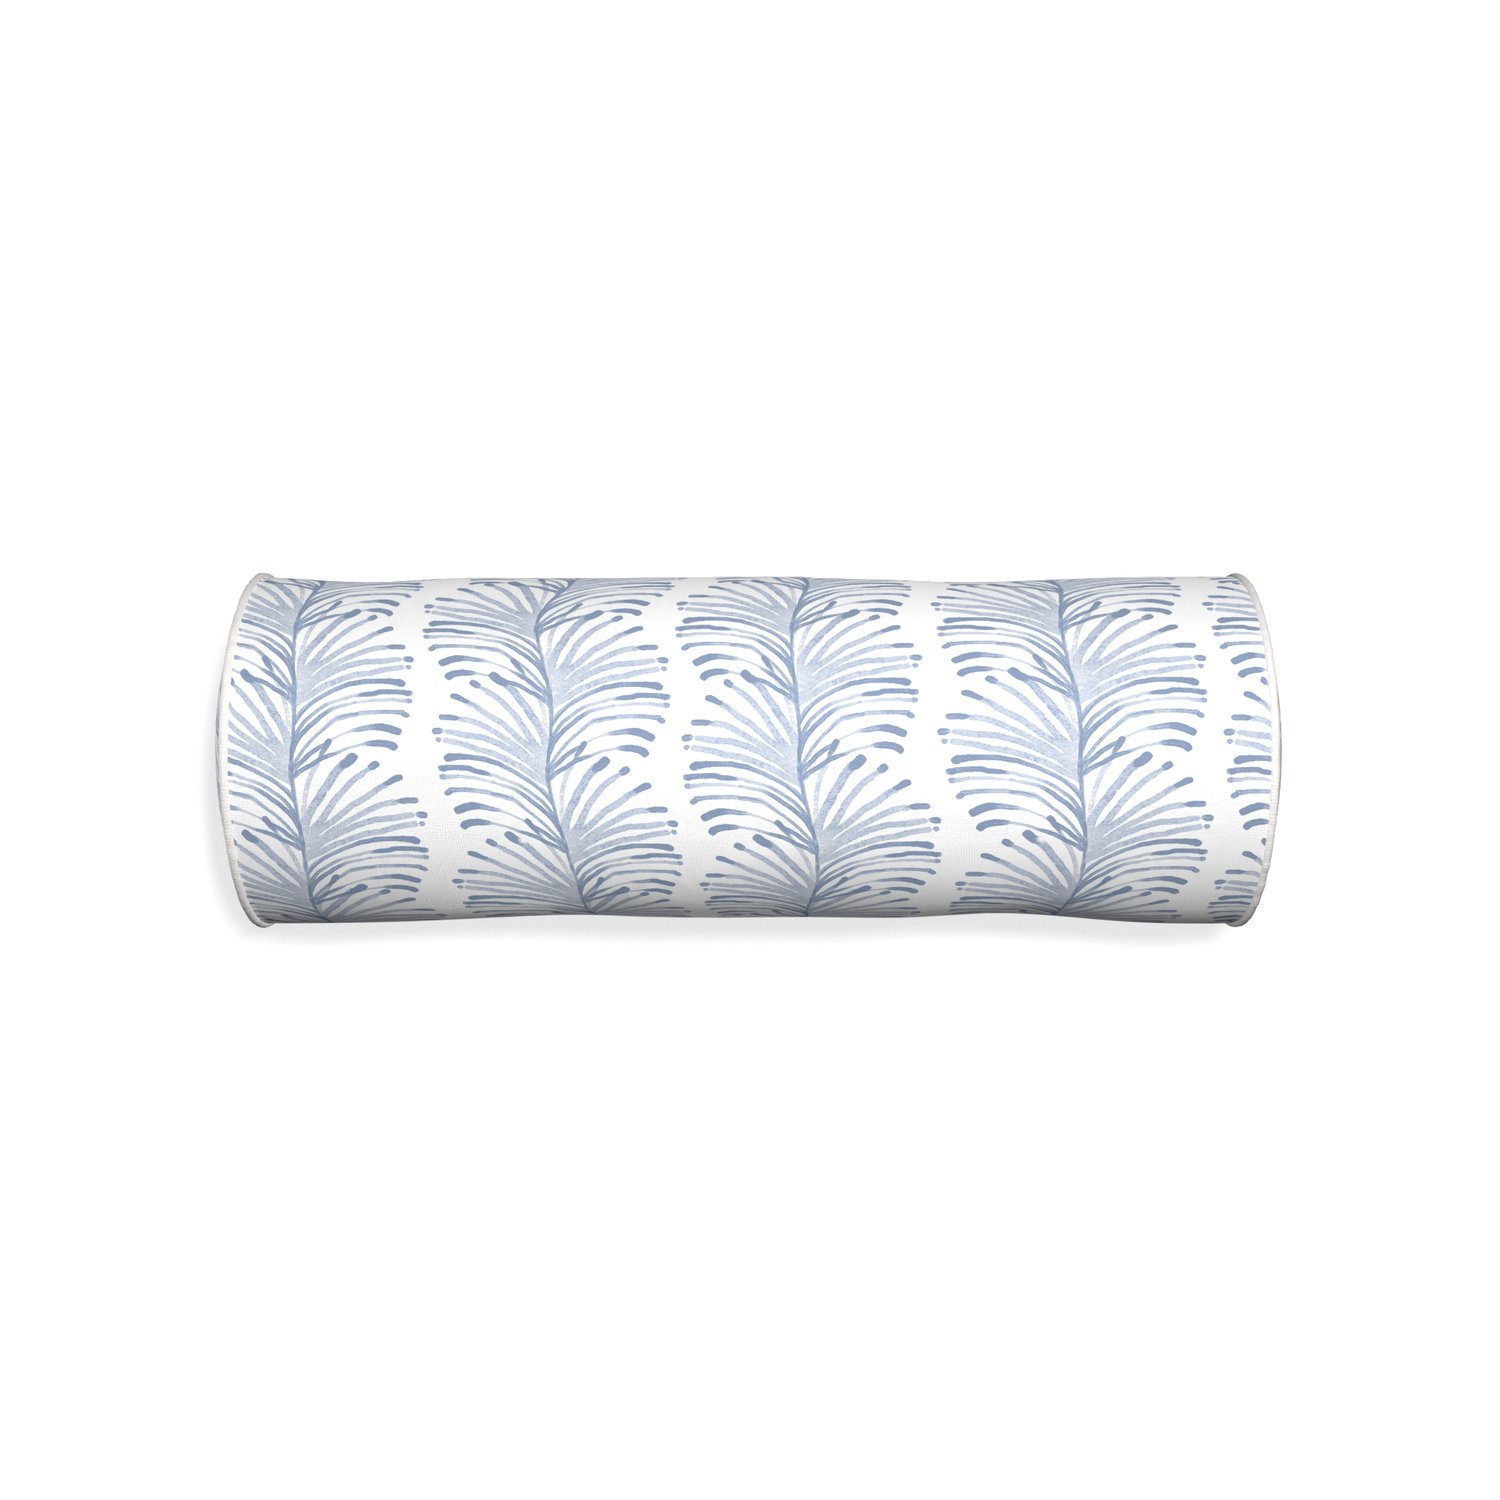 Bolster emma sky custom pillow with snow piping on white background